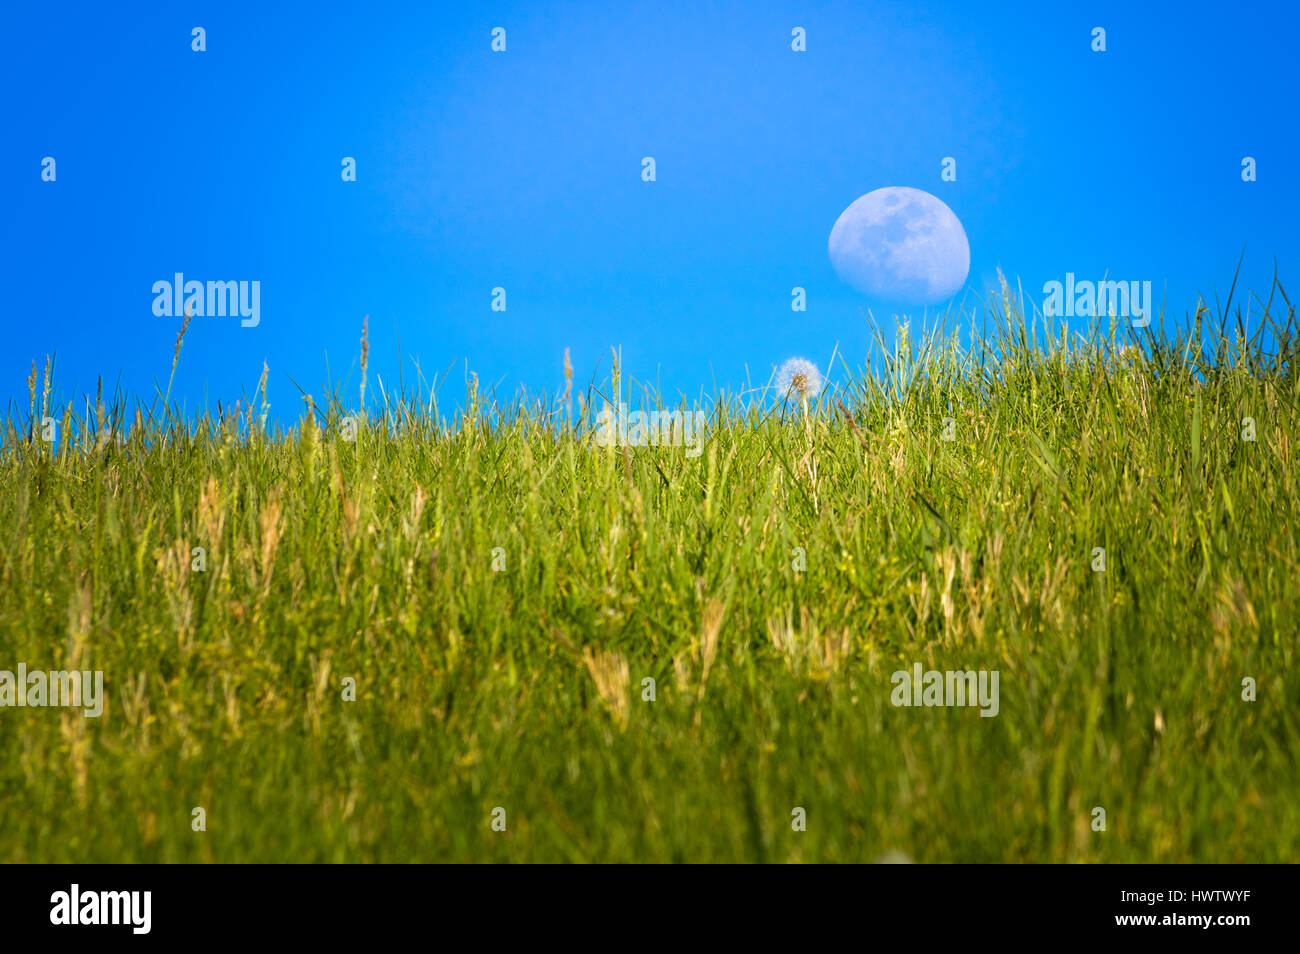 During the day, a waxing gibbous moon rises along a hillside of Spring green grass and dandelion. Stock Photo